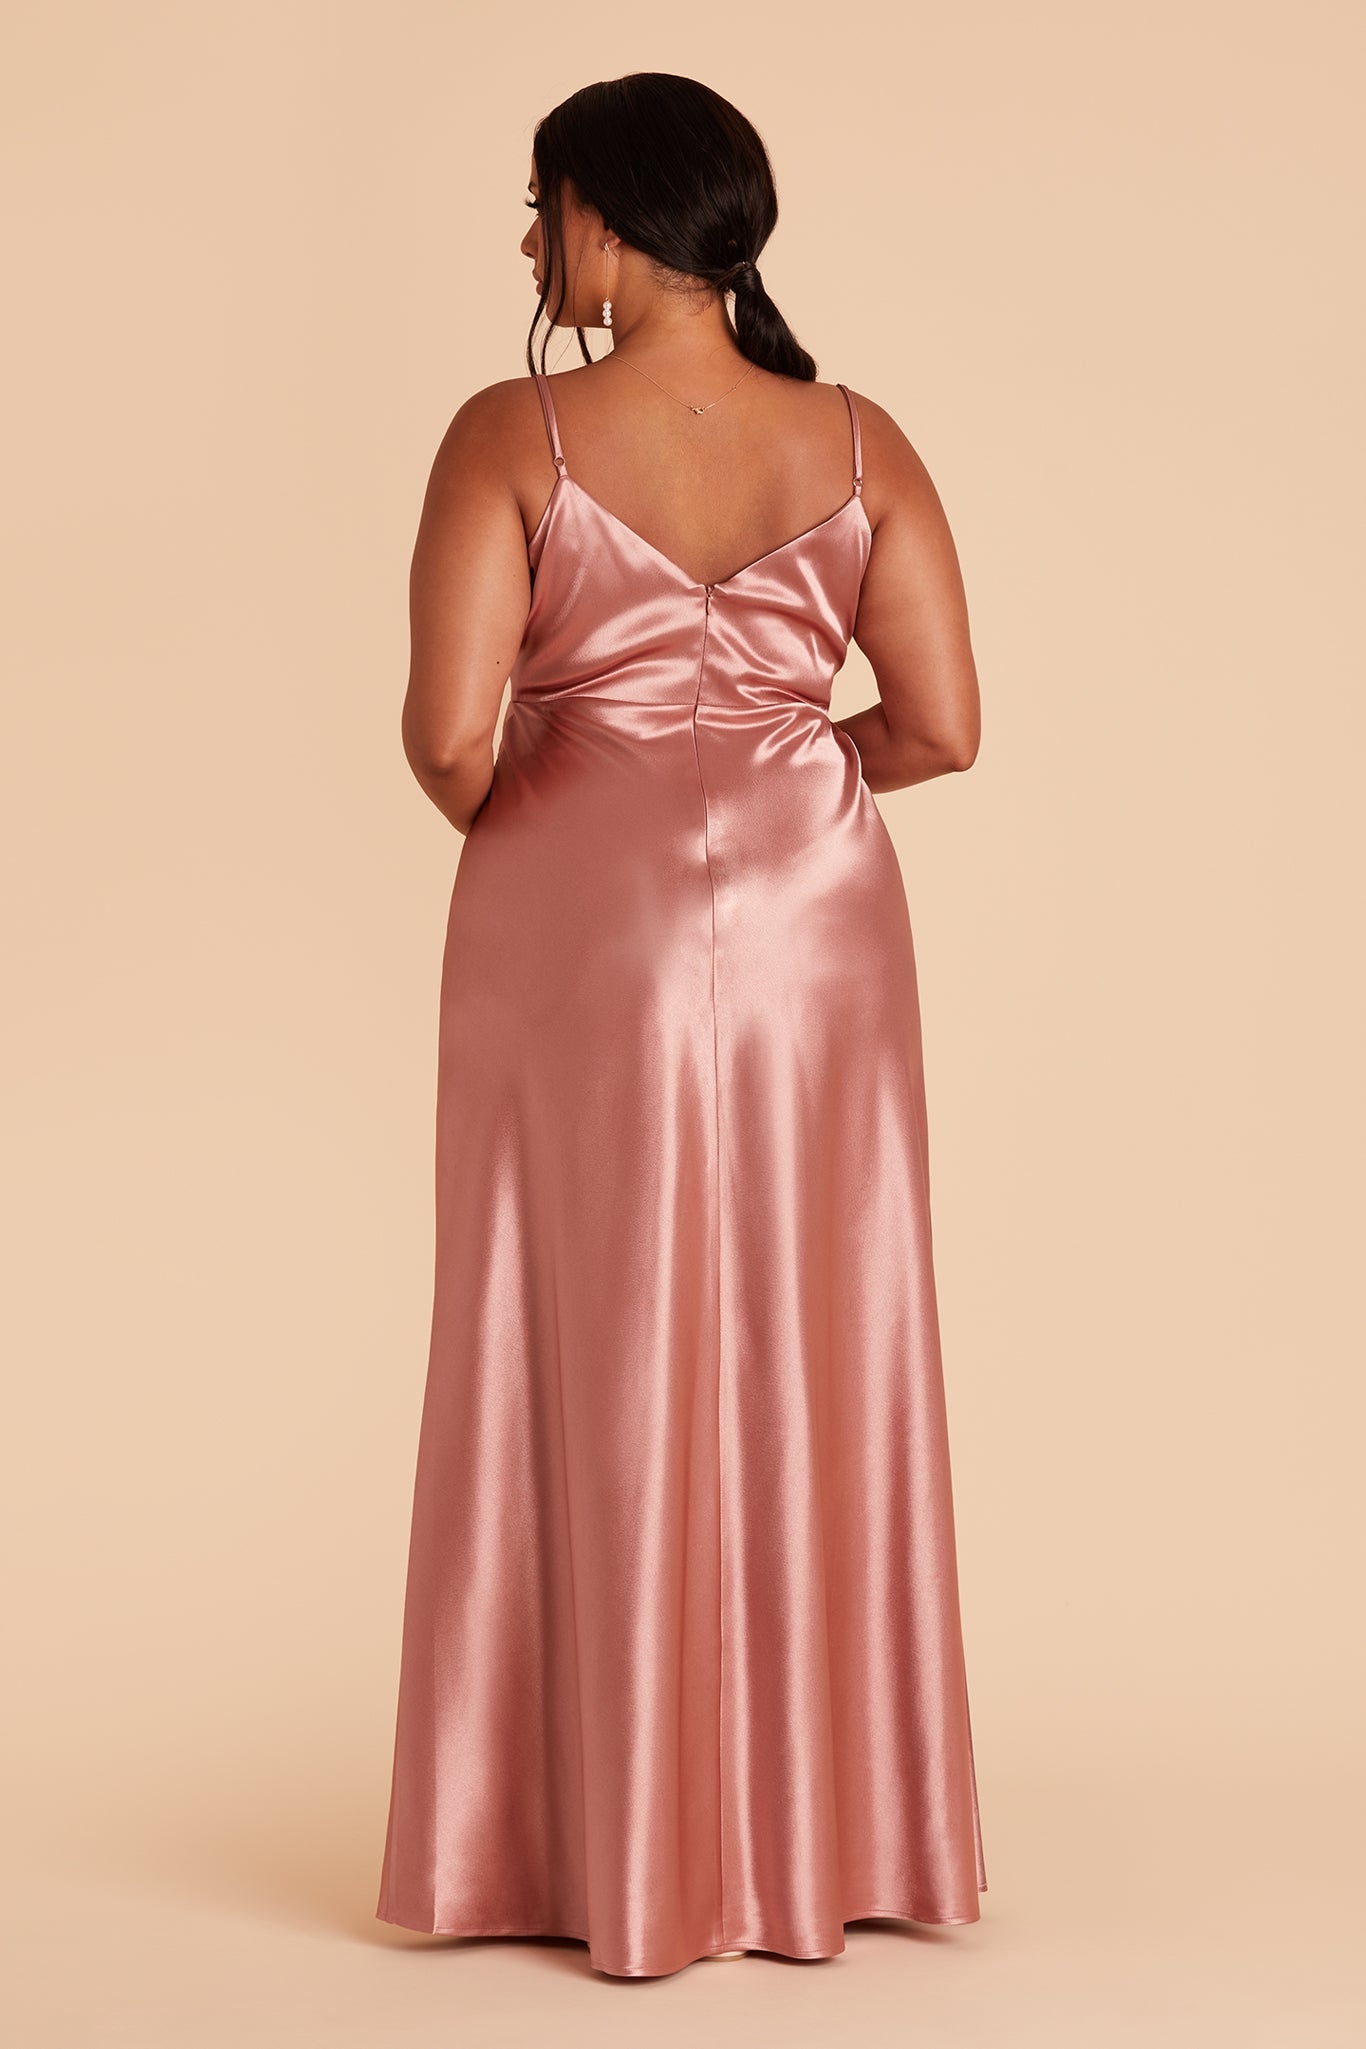 Jay plus size bridesmaid dress with slit in desert rose satin by Birdy Grey, back view